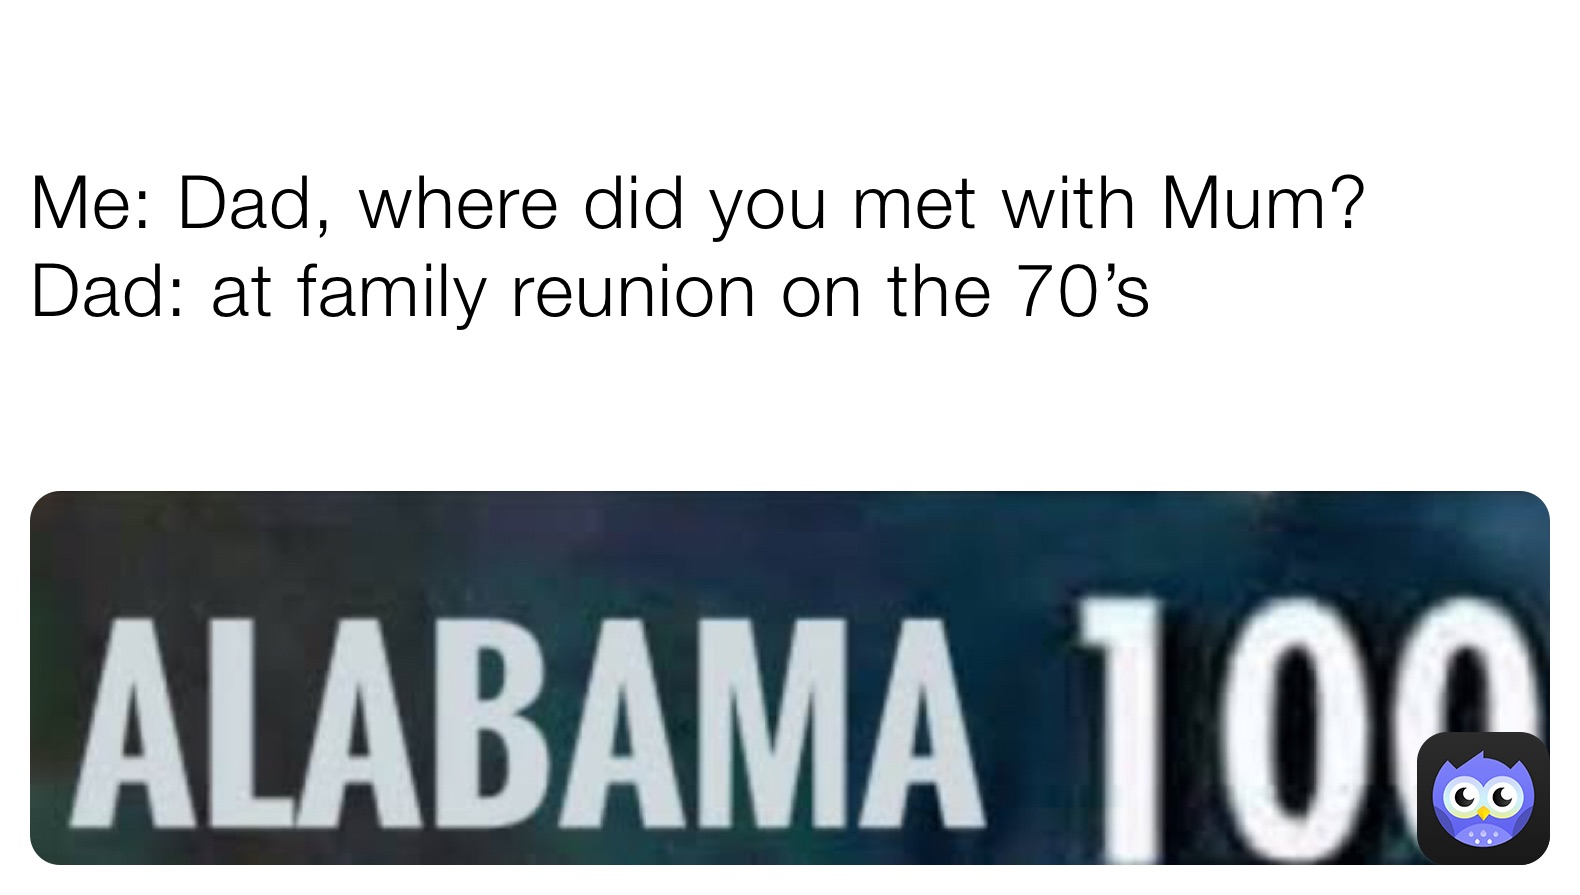 Me: Dad, where did you met with Mum?
Dad: at family reunion on the 70’s